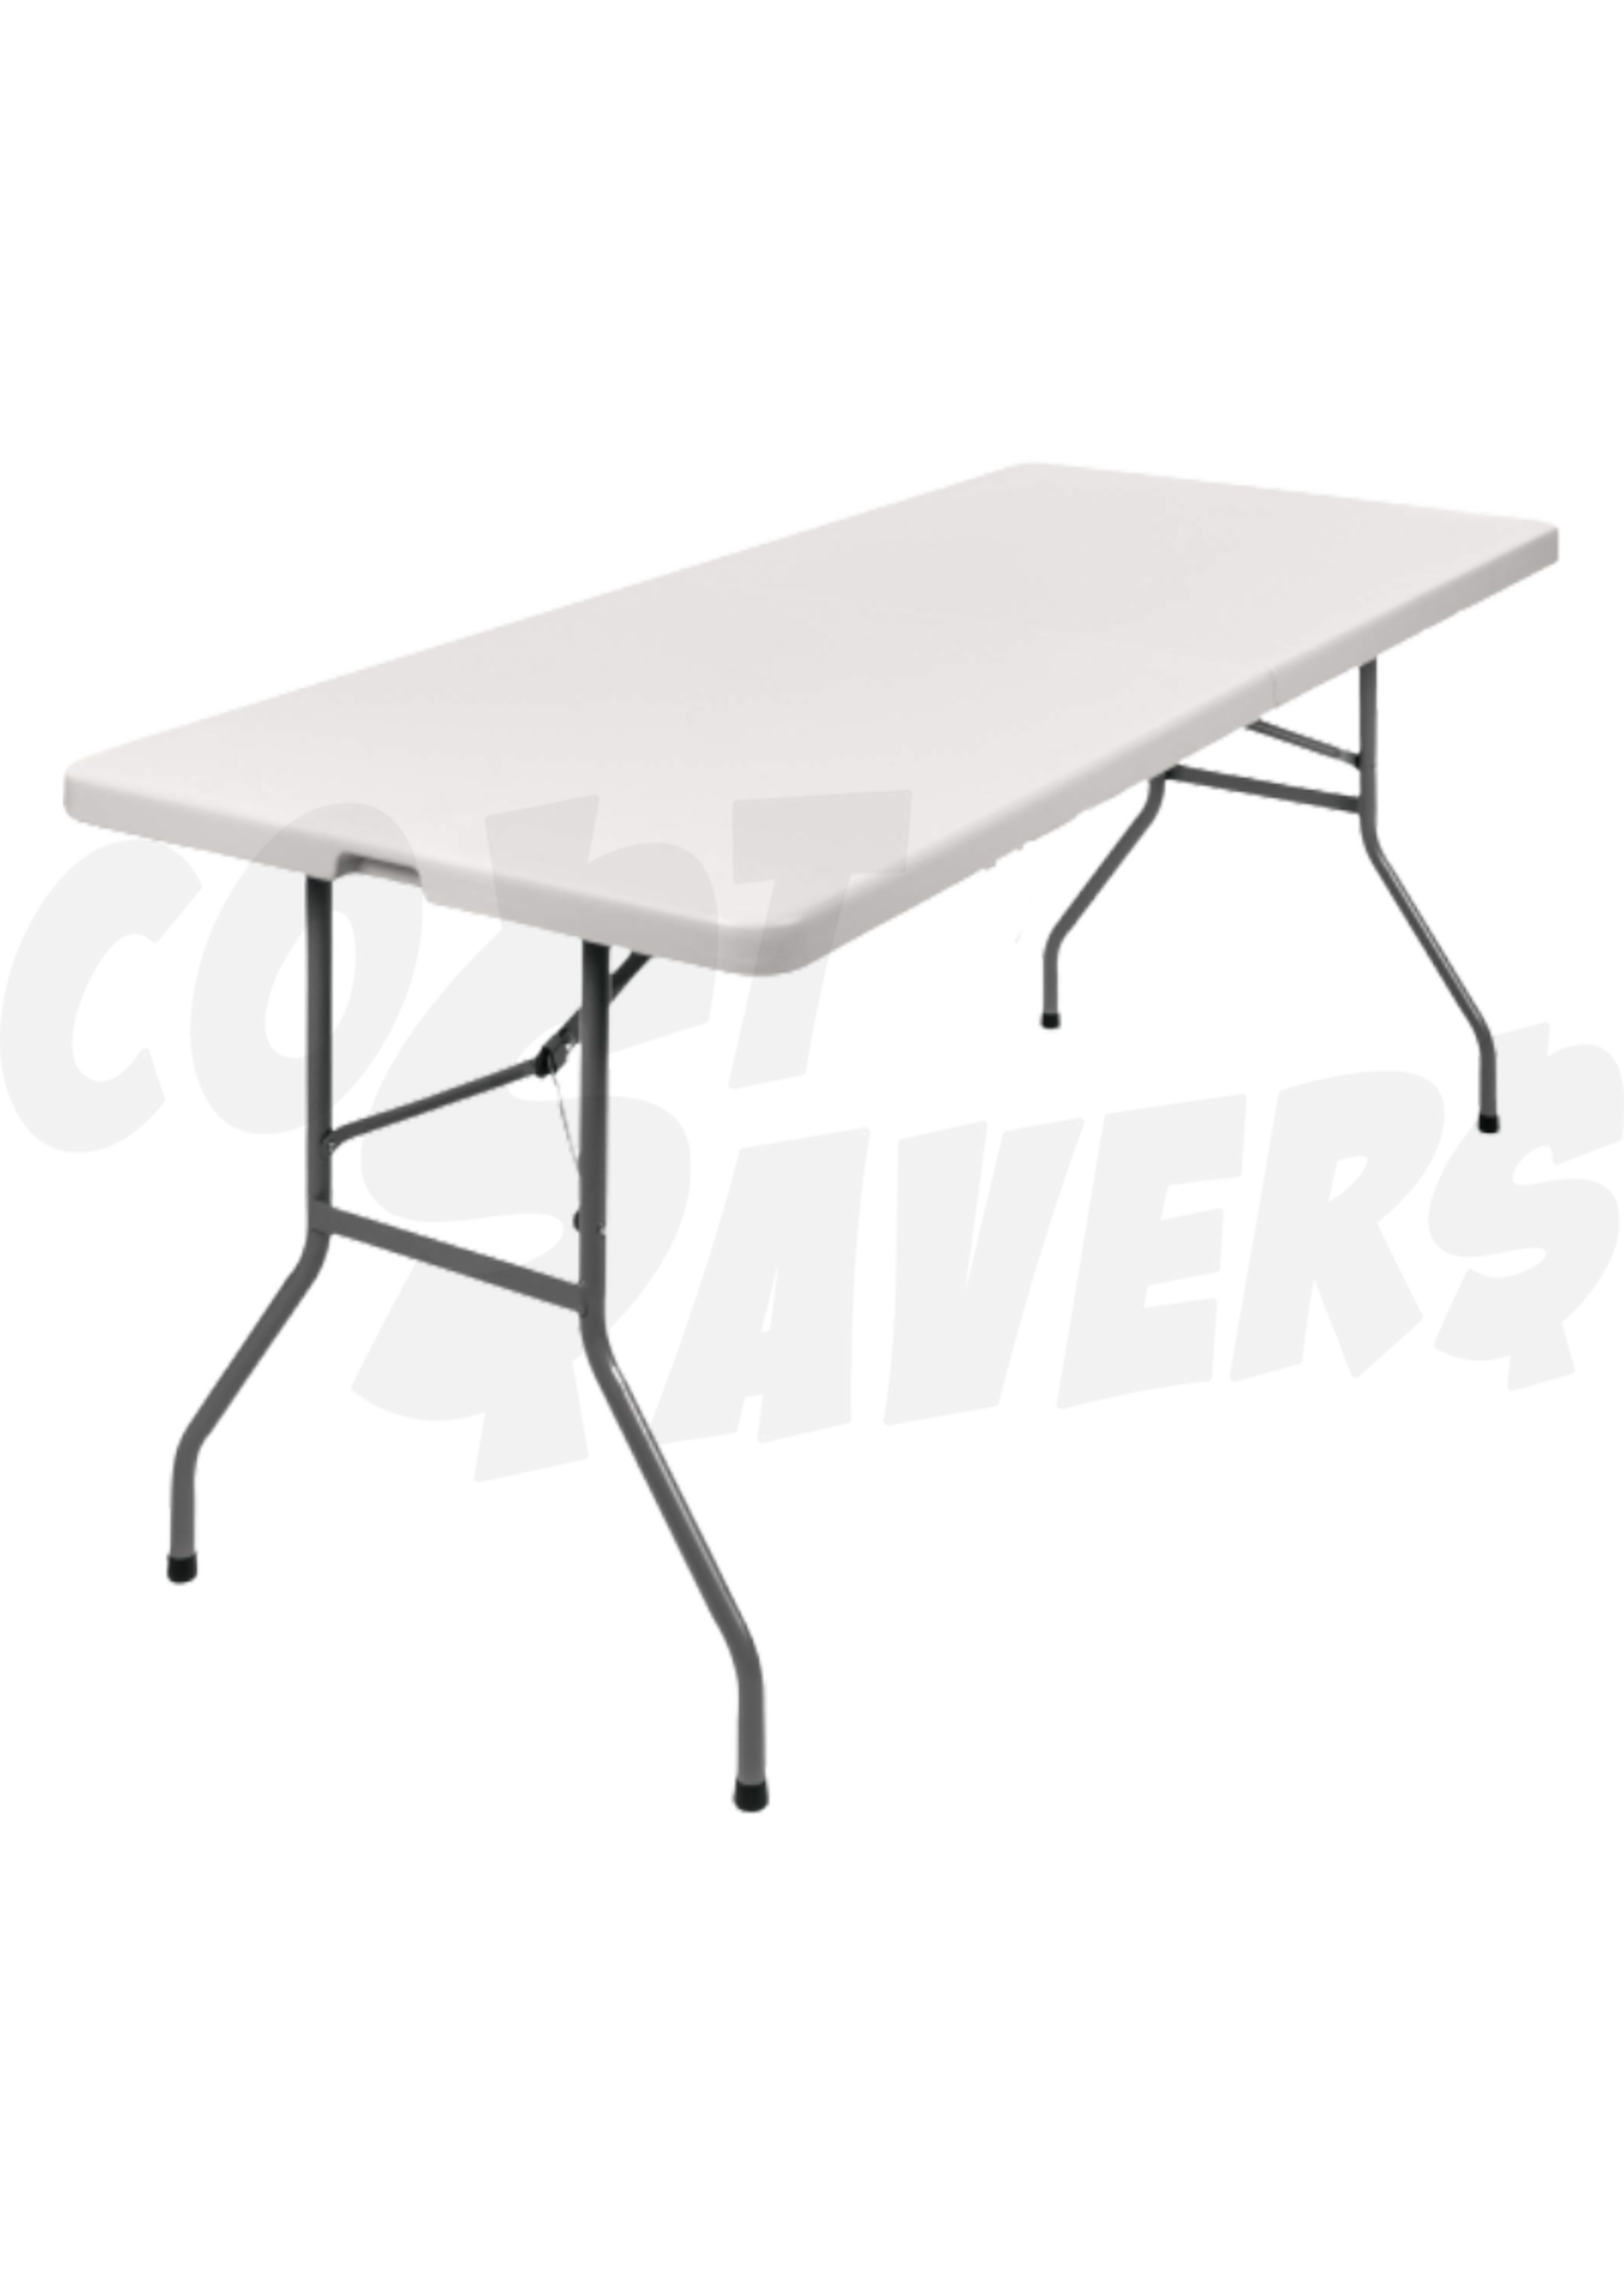 Rhino Top Heavy Duty 6ft Straight Table (Off White)